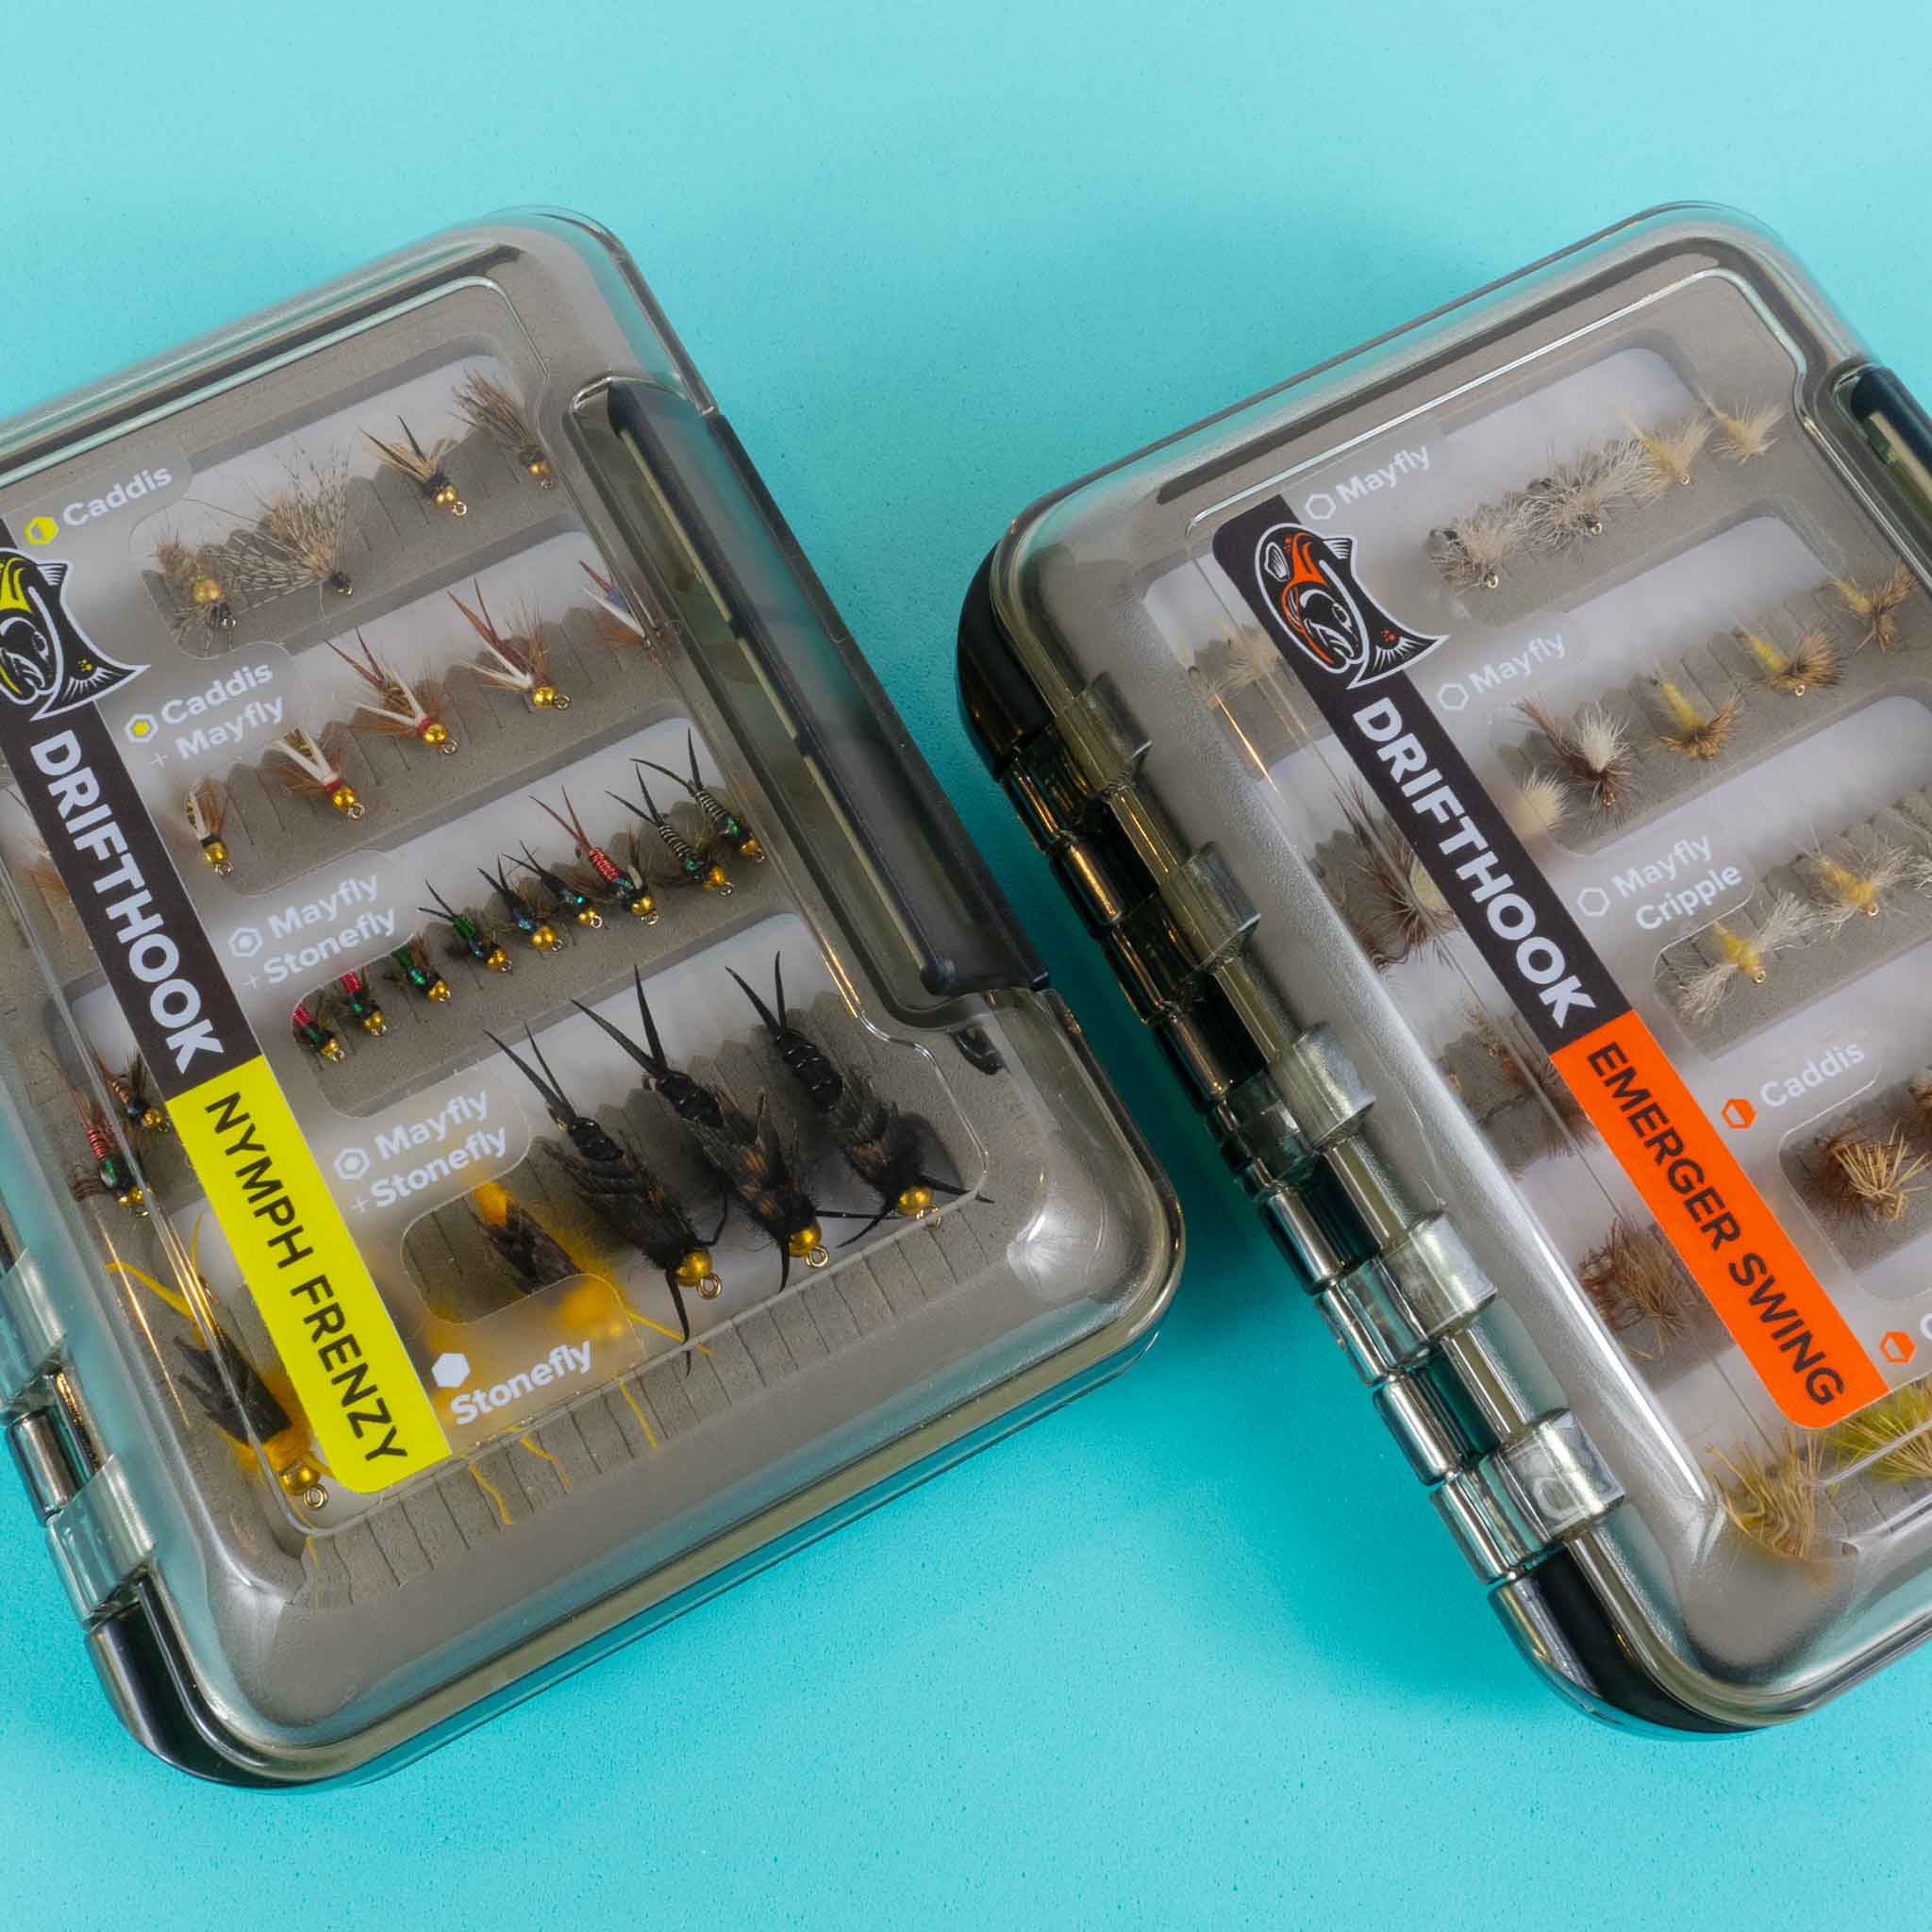 Thor Outdoor Topwater Dry Fly Kit - 36 Pc Assortment of Fly Fishing Flies  for Trout, Bass, Panfish - Black Ant, Foam Spider, Mosquito - Hook Size 12  to 14 : : Sports, Fitness & Outdoors